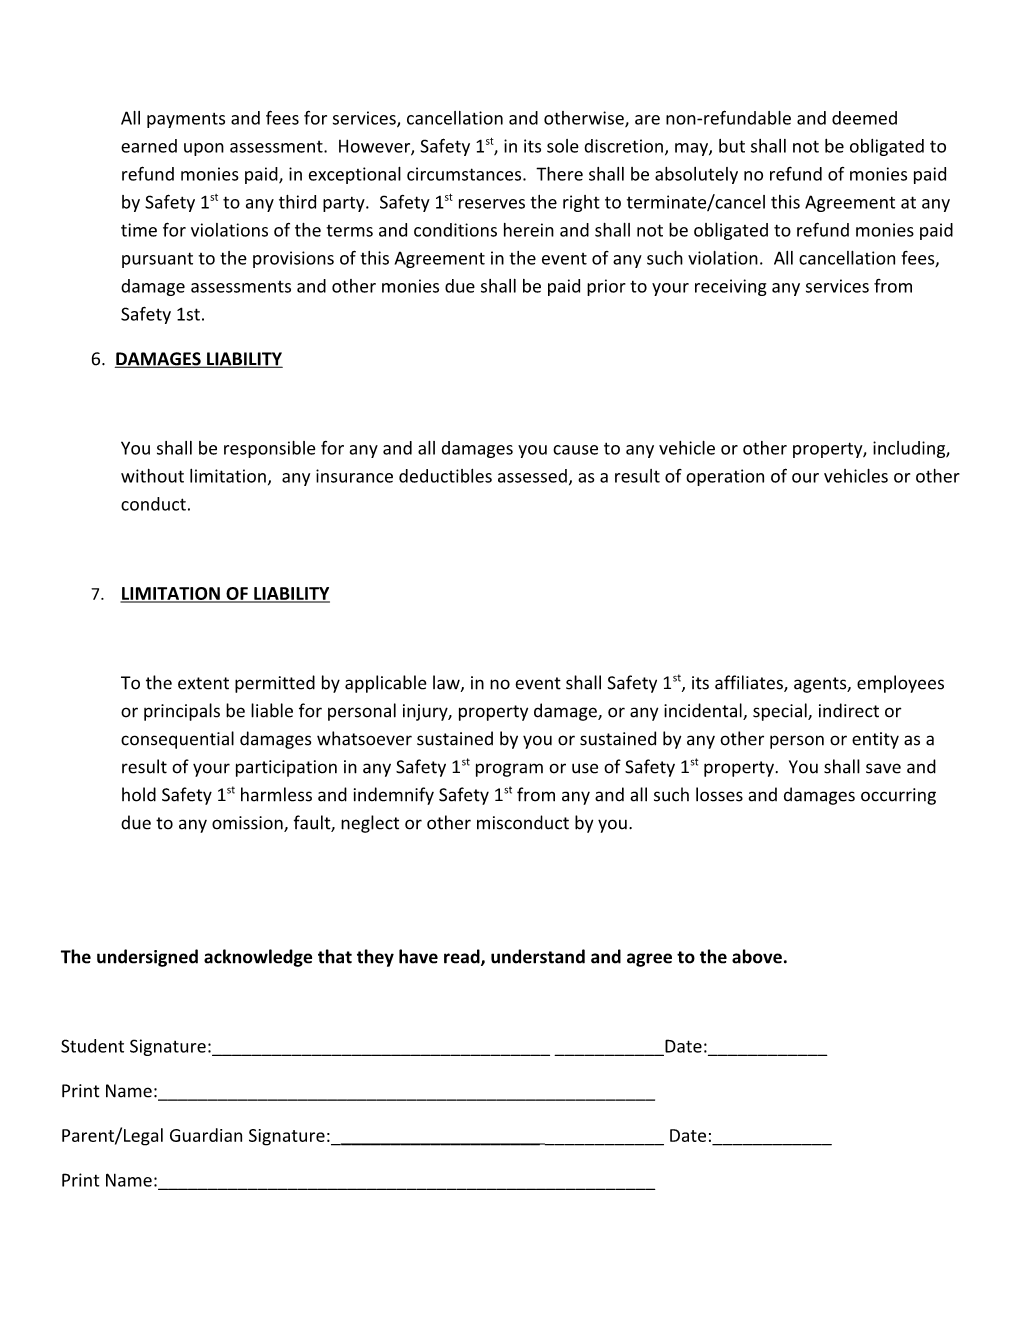 Safety 1St Driving Academy, Inc. Registration Agreement